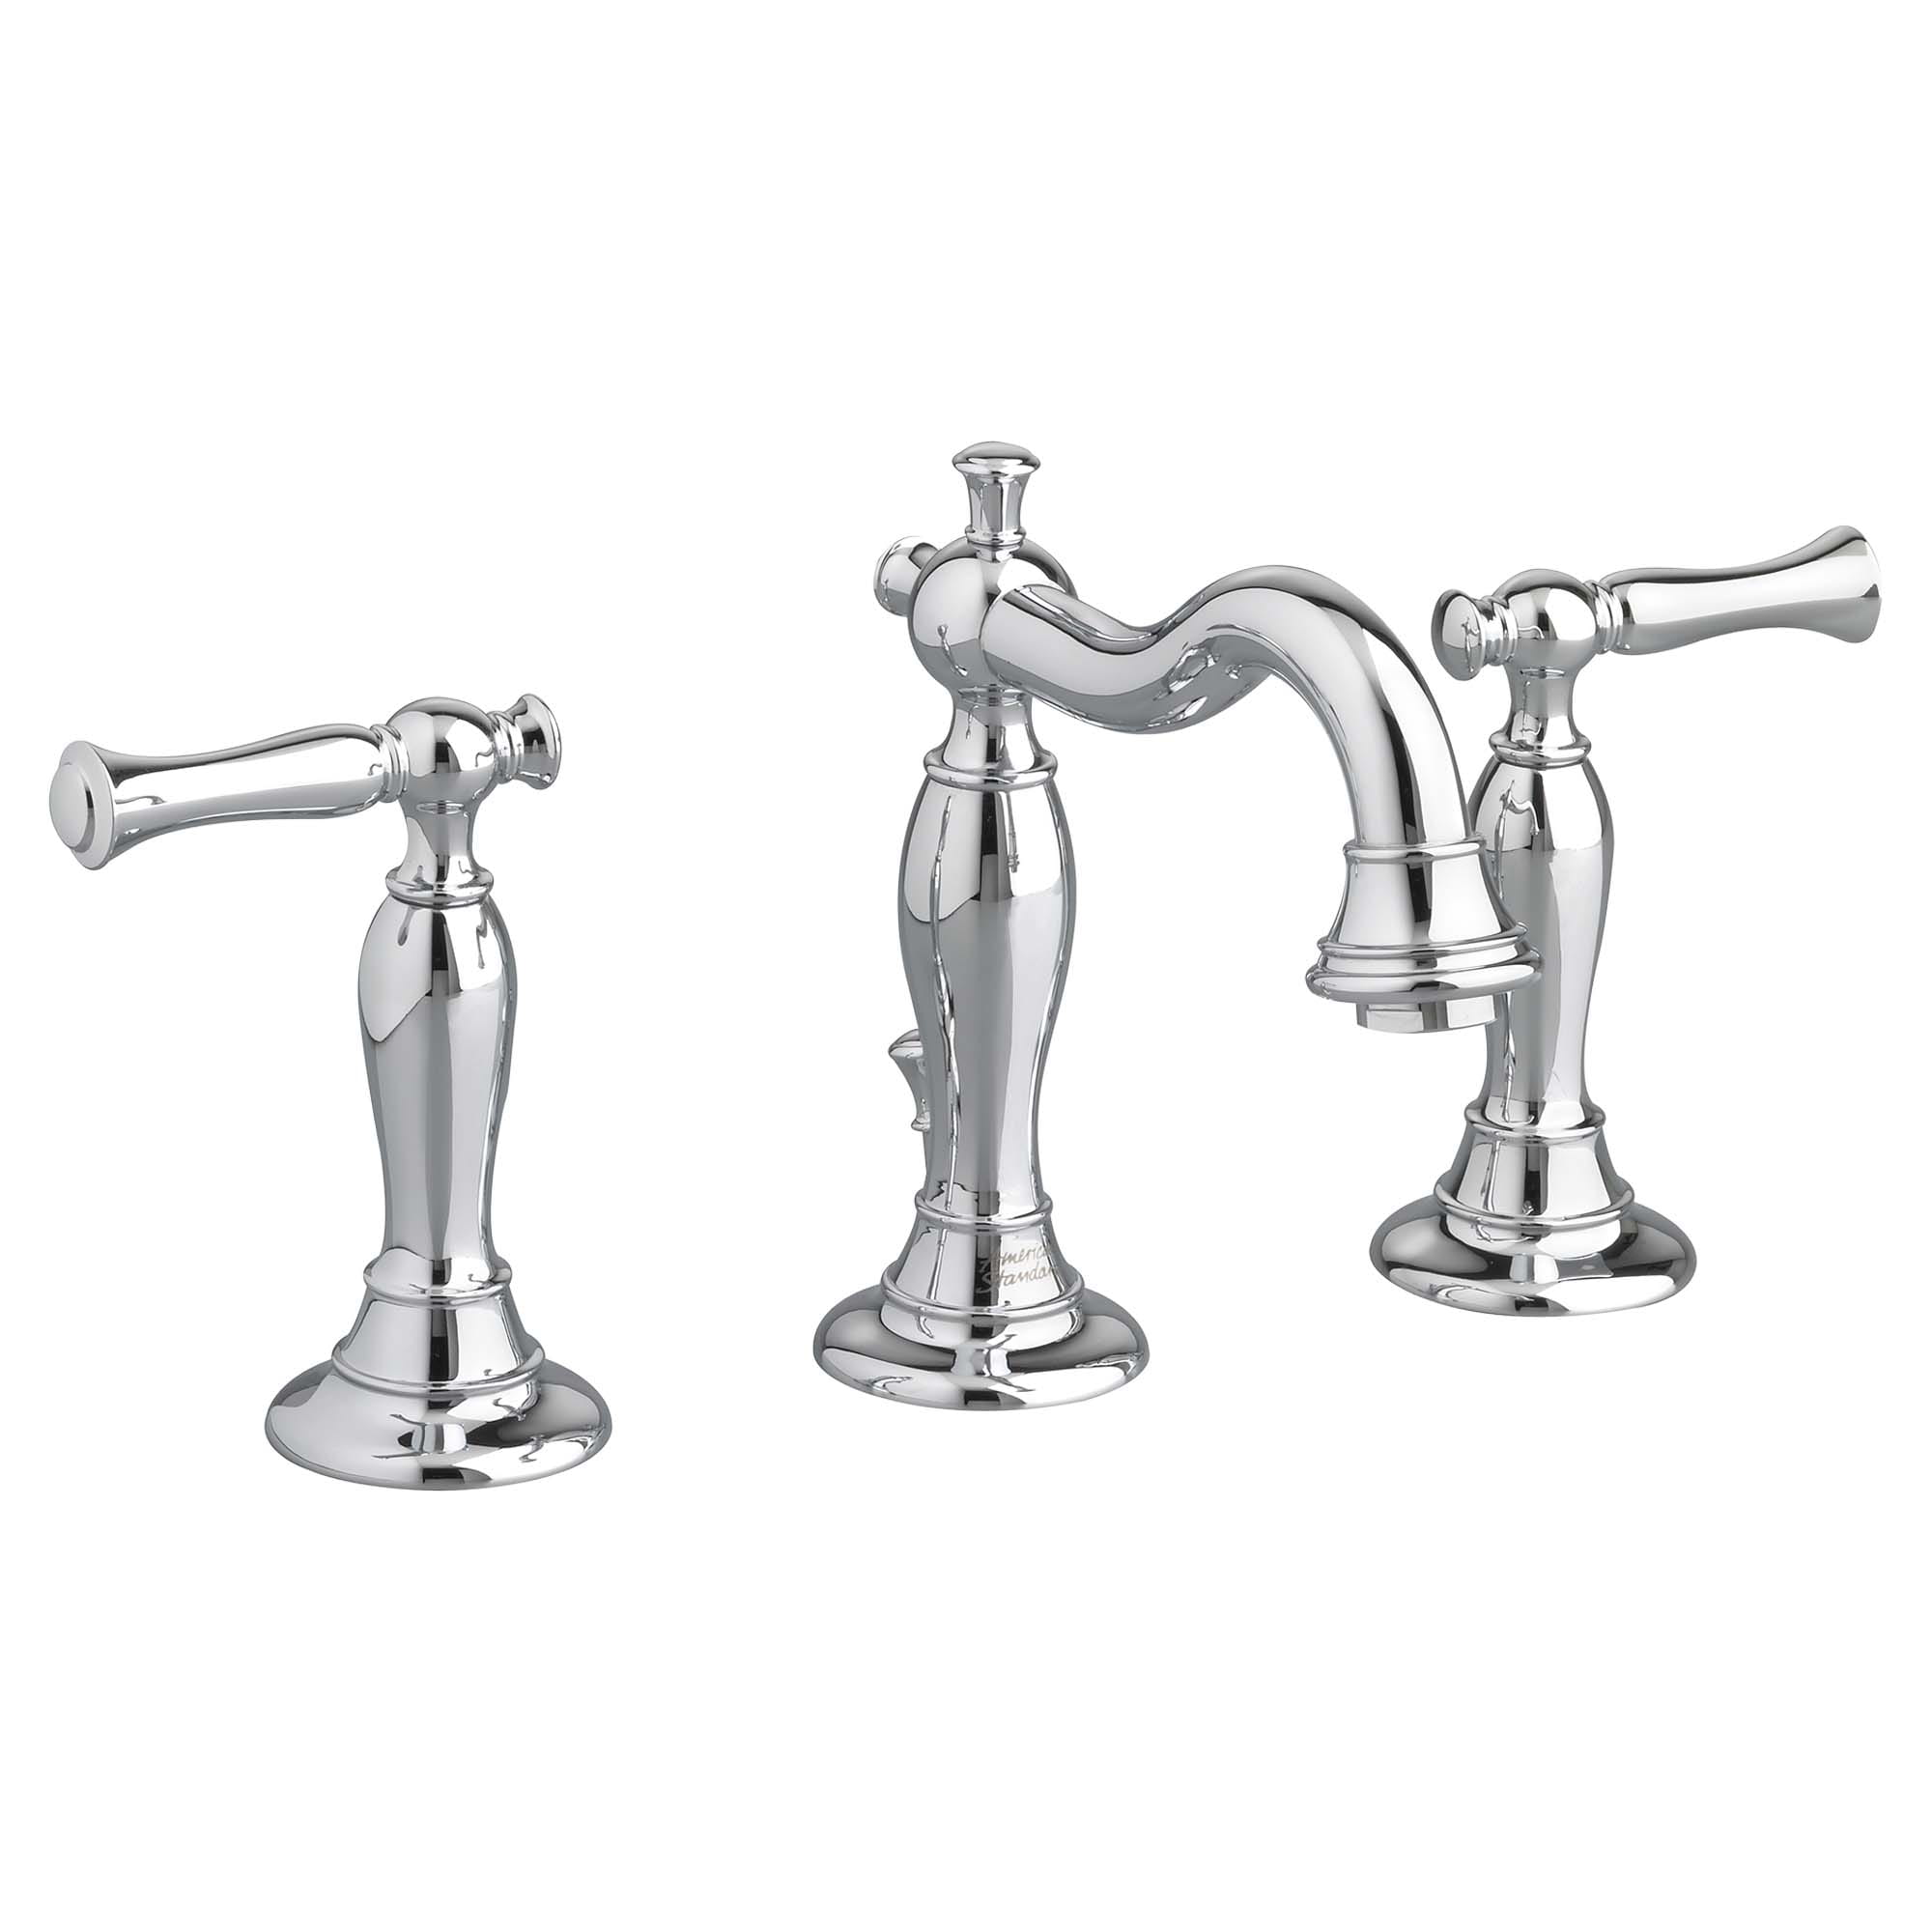 Quentin® 8-Inch Widespread 2-Handle Bathroom Faucet 1.2 gpm/4.5 L/min With Lever Handles